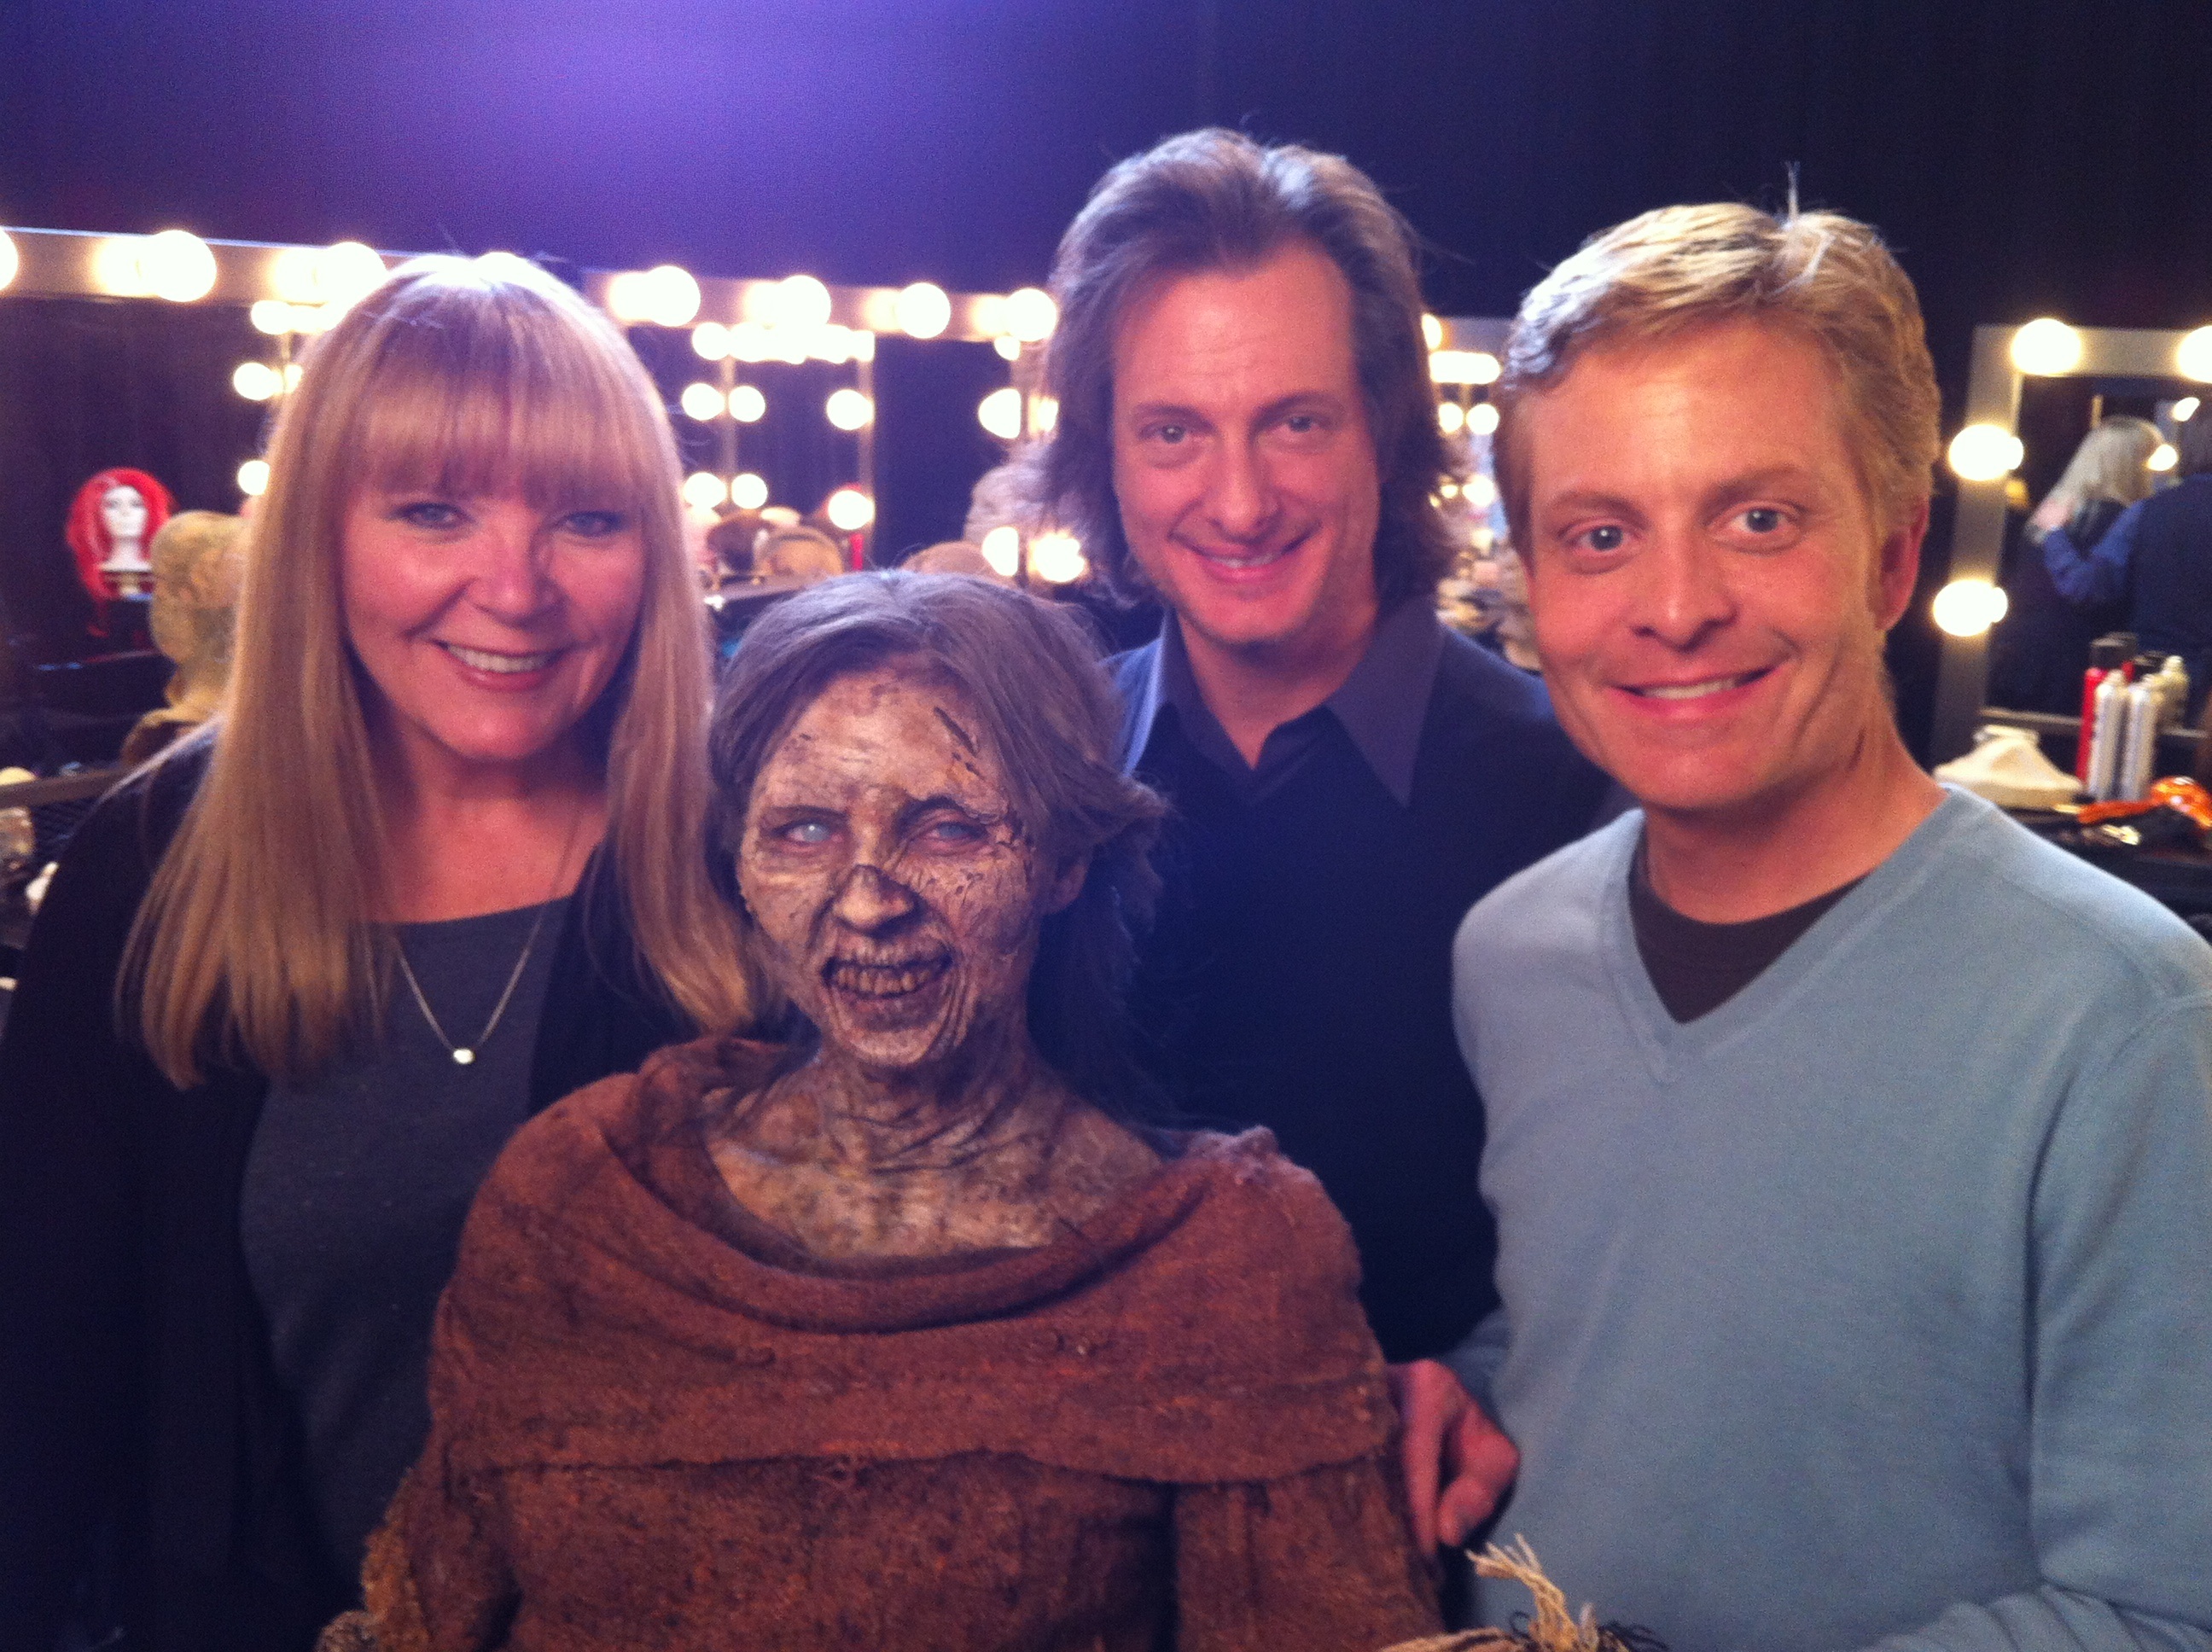 Bill Corso with Ve Neil, Douglas Noe and friend for 'Turbo Tax' Zombie spot.